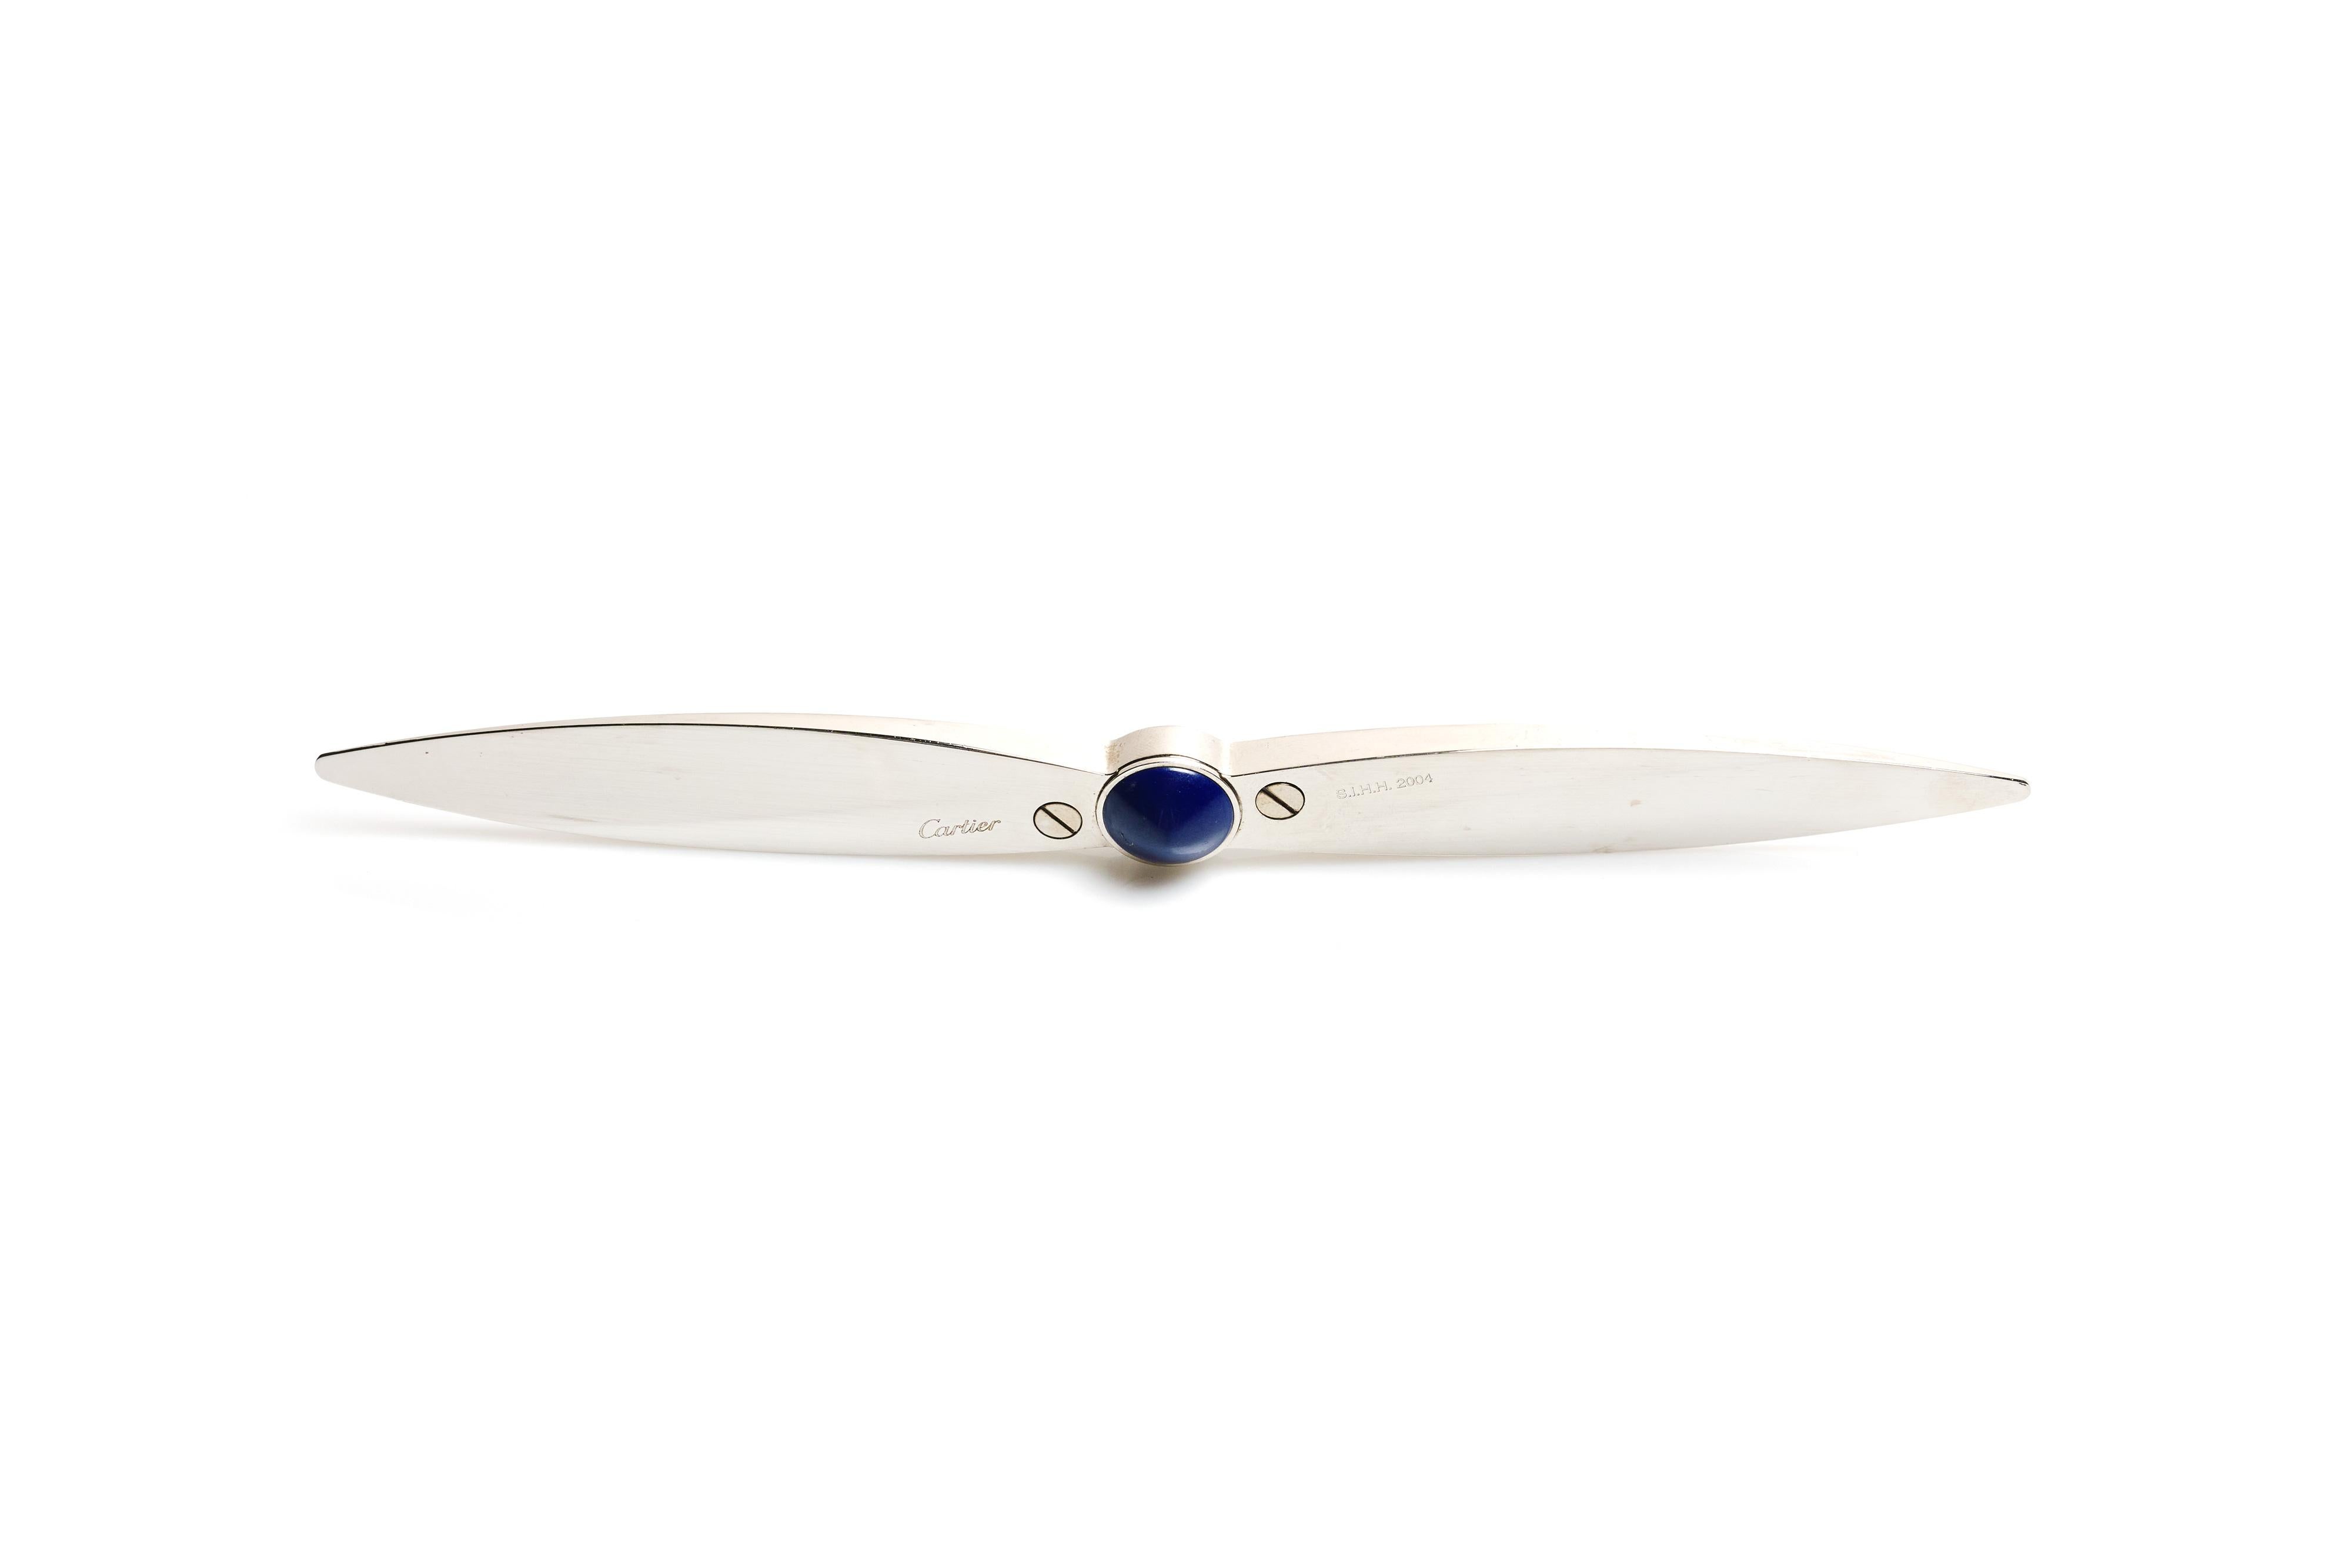 A beautiful letter opener by Cartier, done in silvered brass with a lapis cabochon set into the center. Crafted in the form of an airplane propeller.

Marked on edge near center.